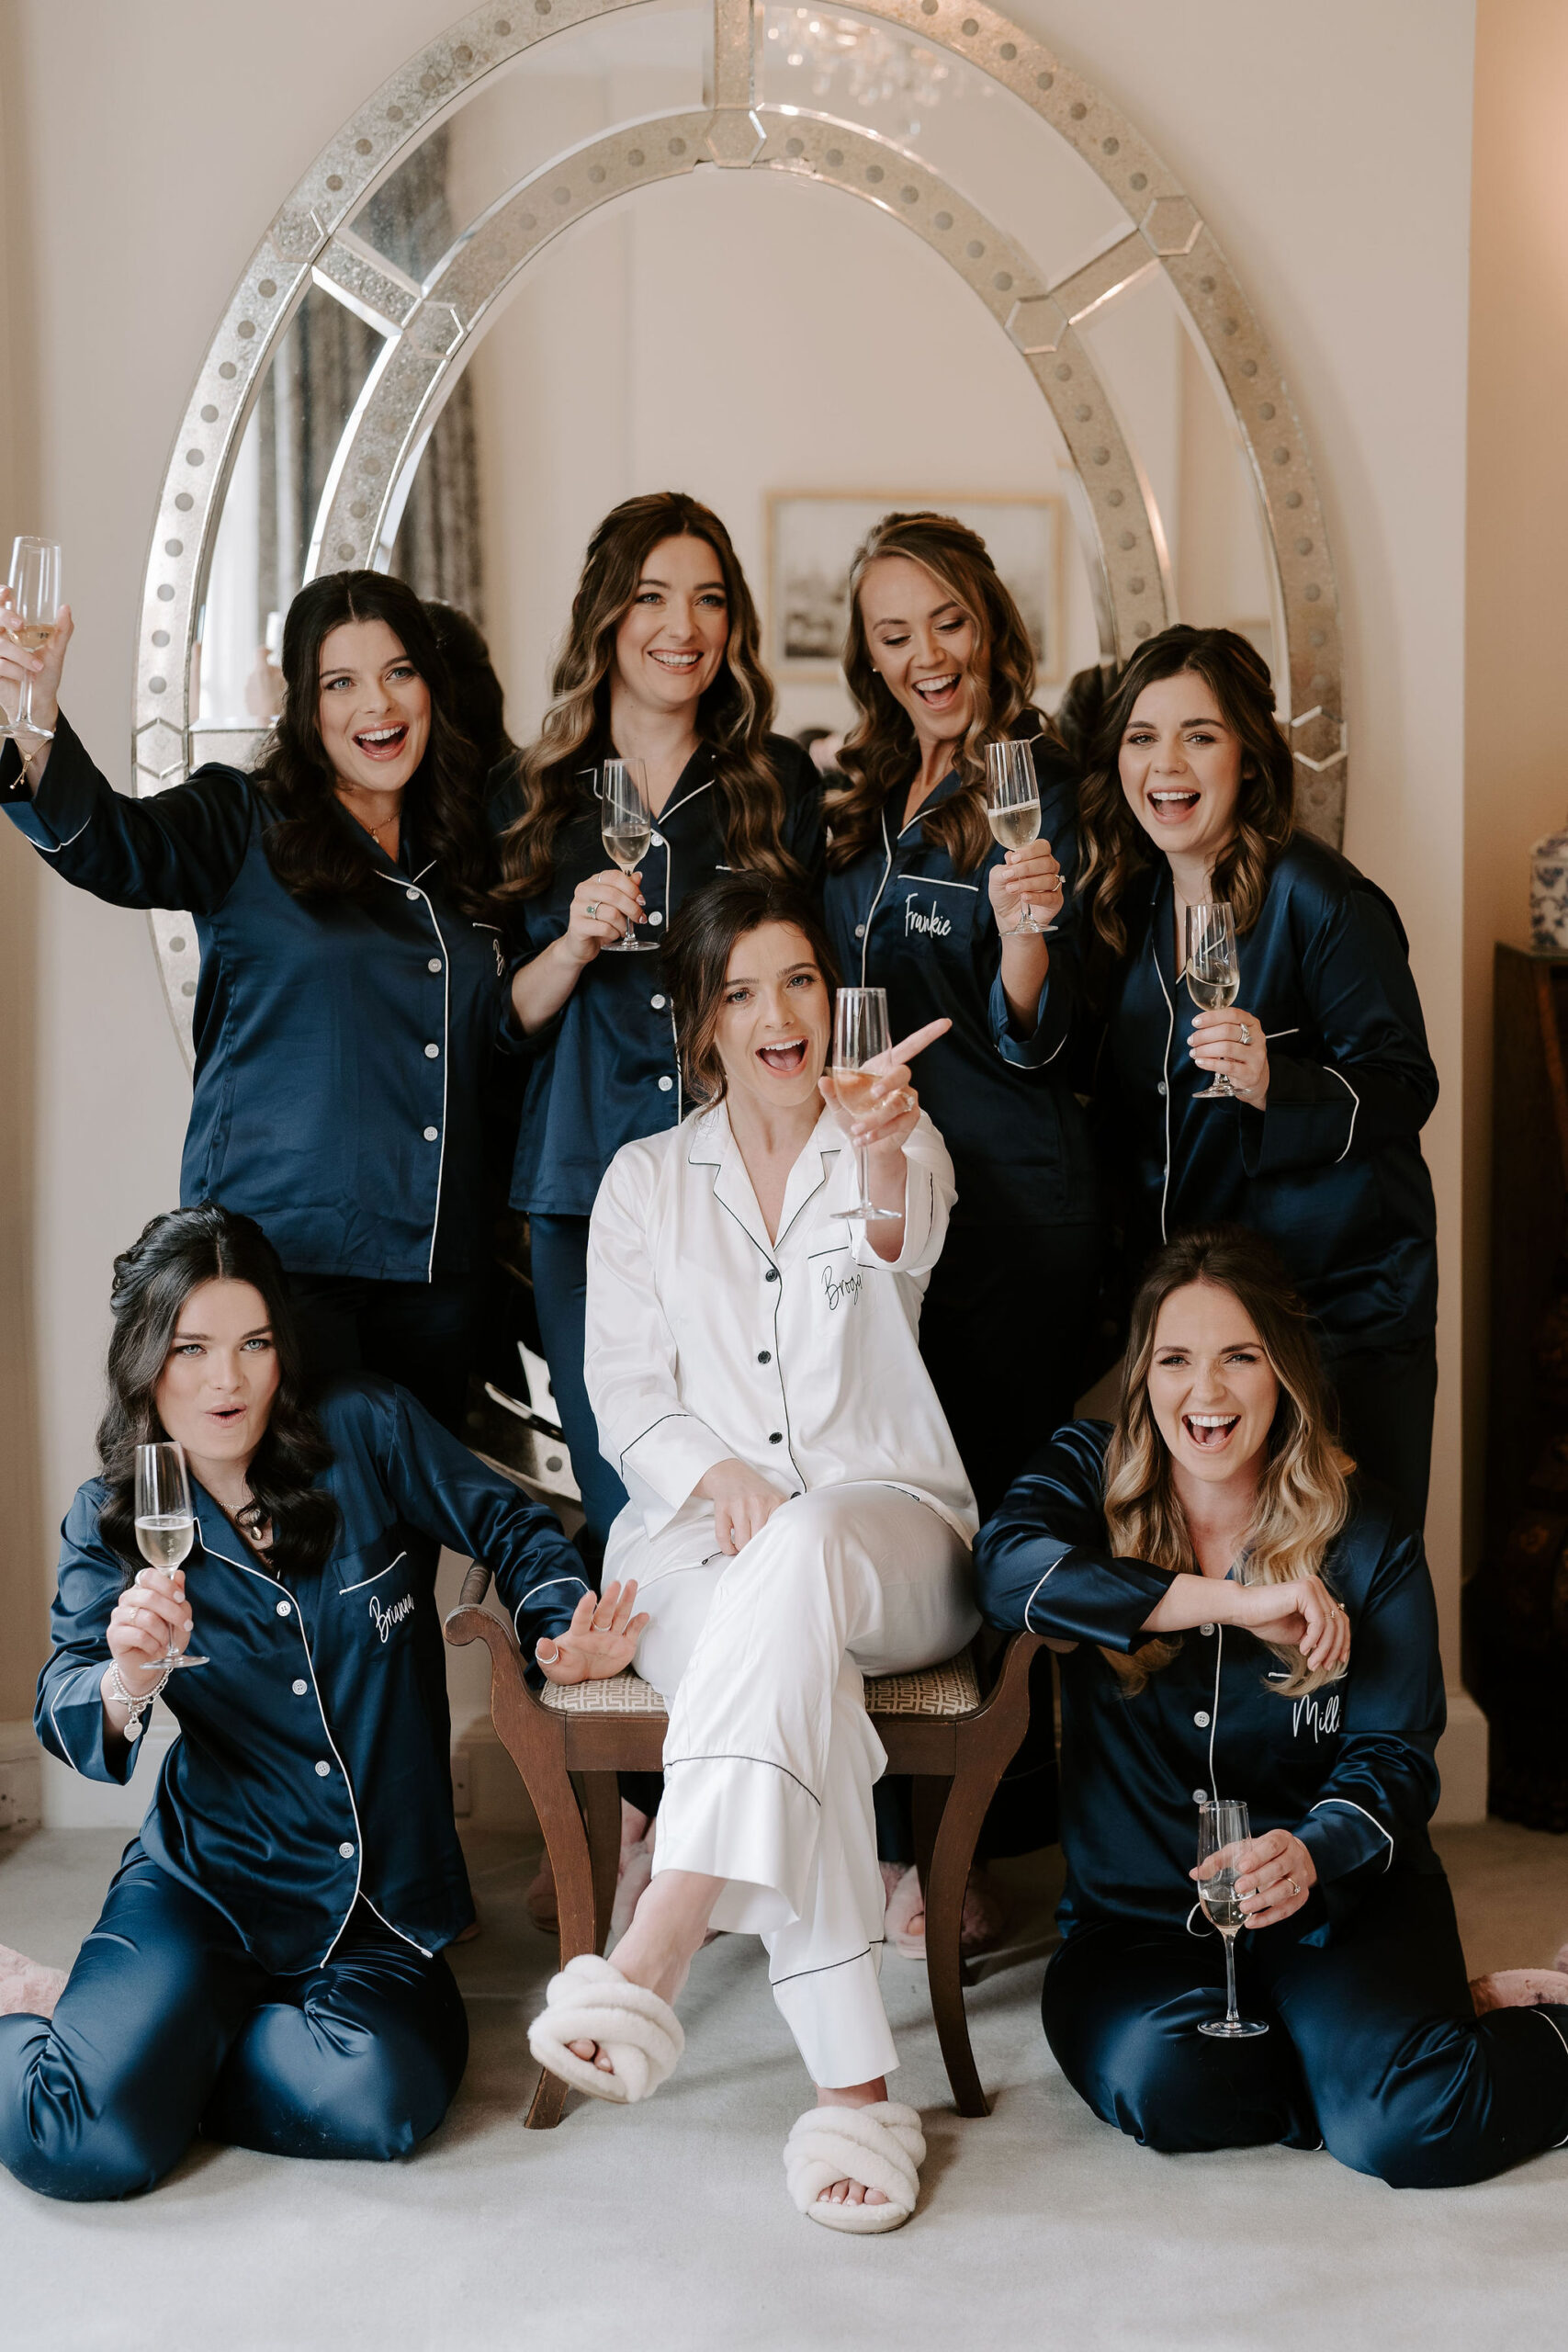 Six bridesmaids wearing navy silk pyjamas with white trimmings surround a bride wearing a white silk pair of pyjamas holding champagne glasses and laughing at the camera